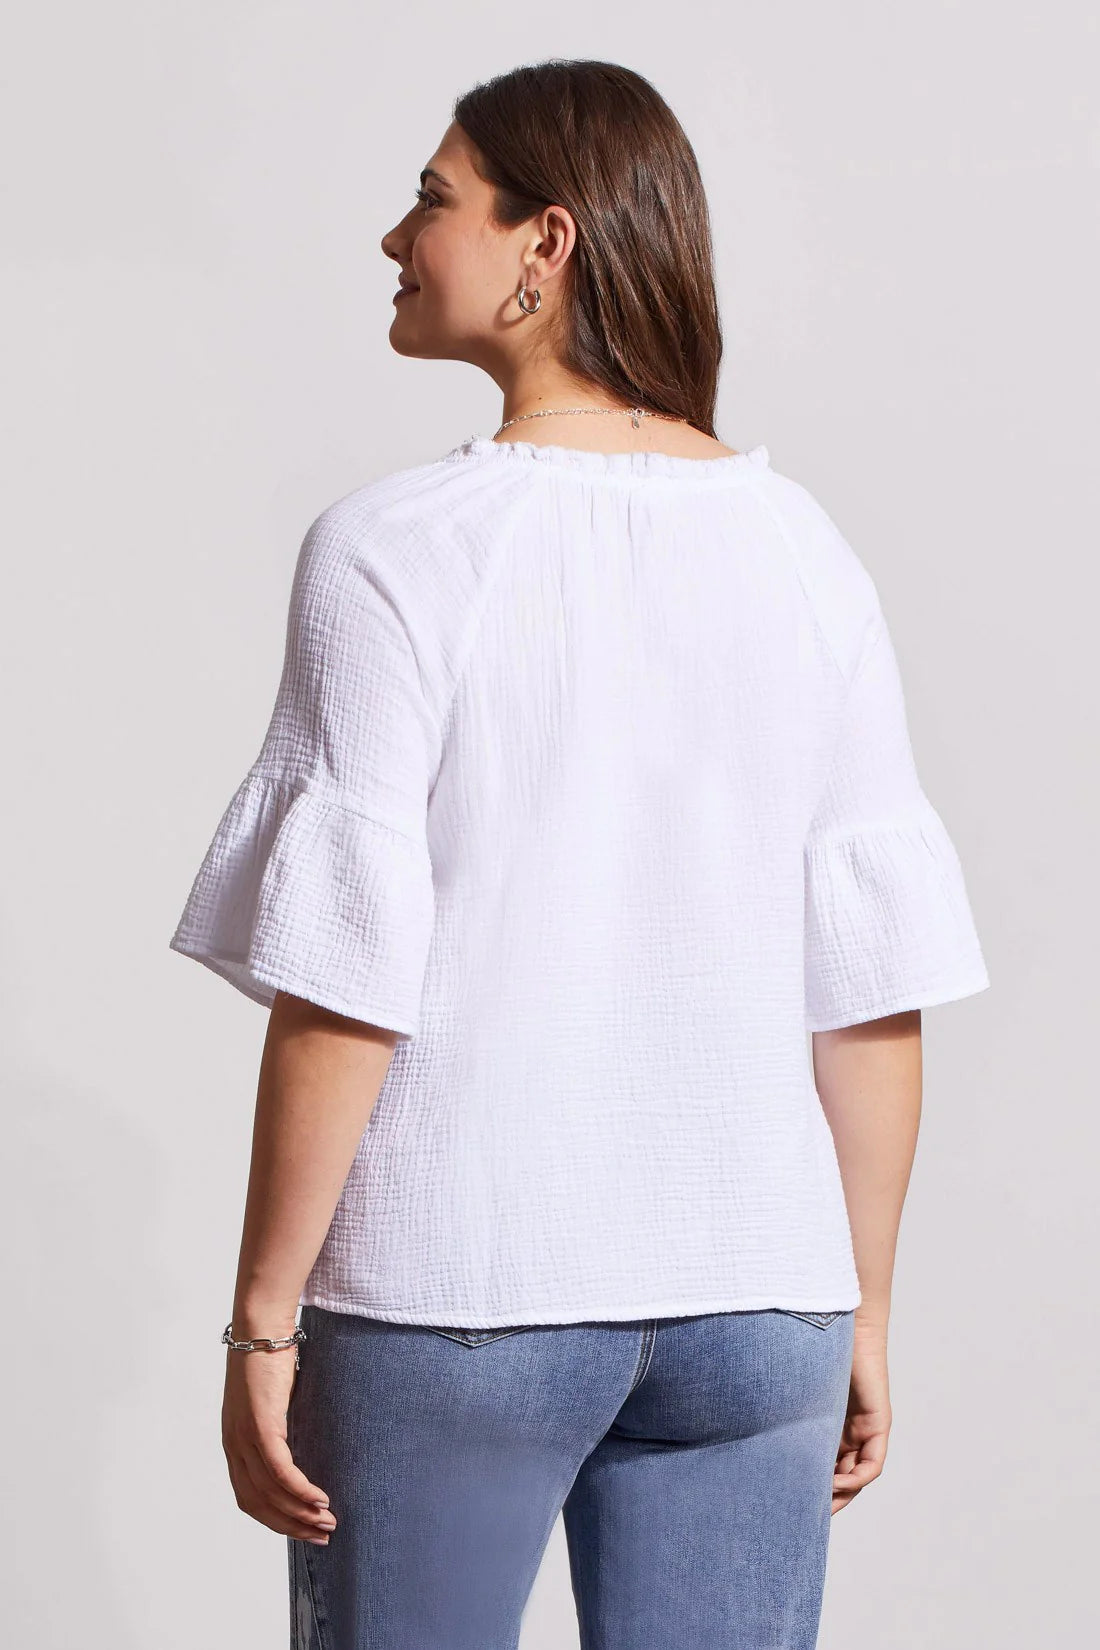 Crafted from crinkled gauze cotton, this blouse brings a lightweight feel and refined look to your regular rotation.